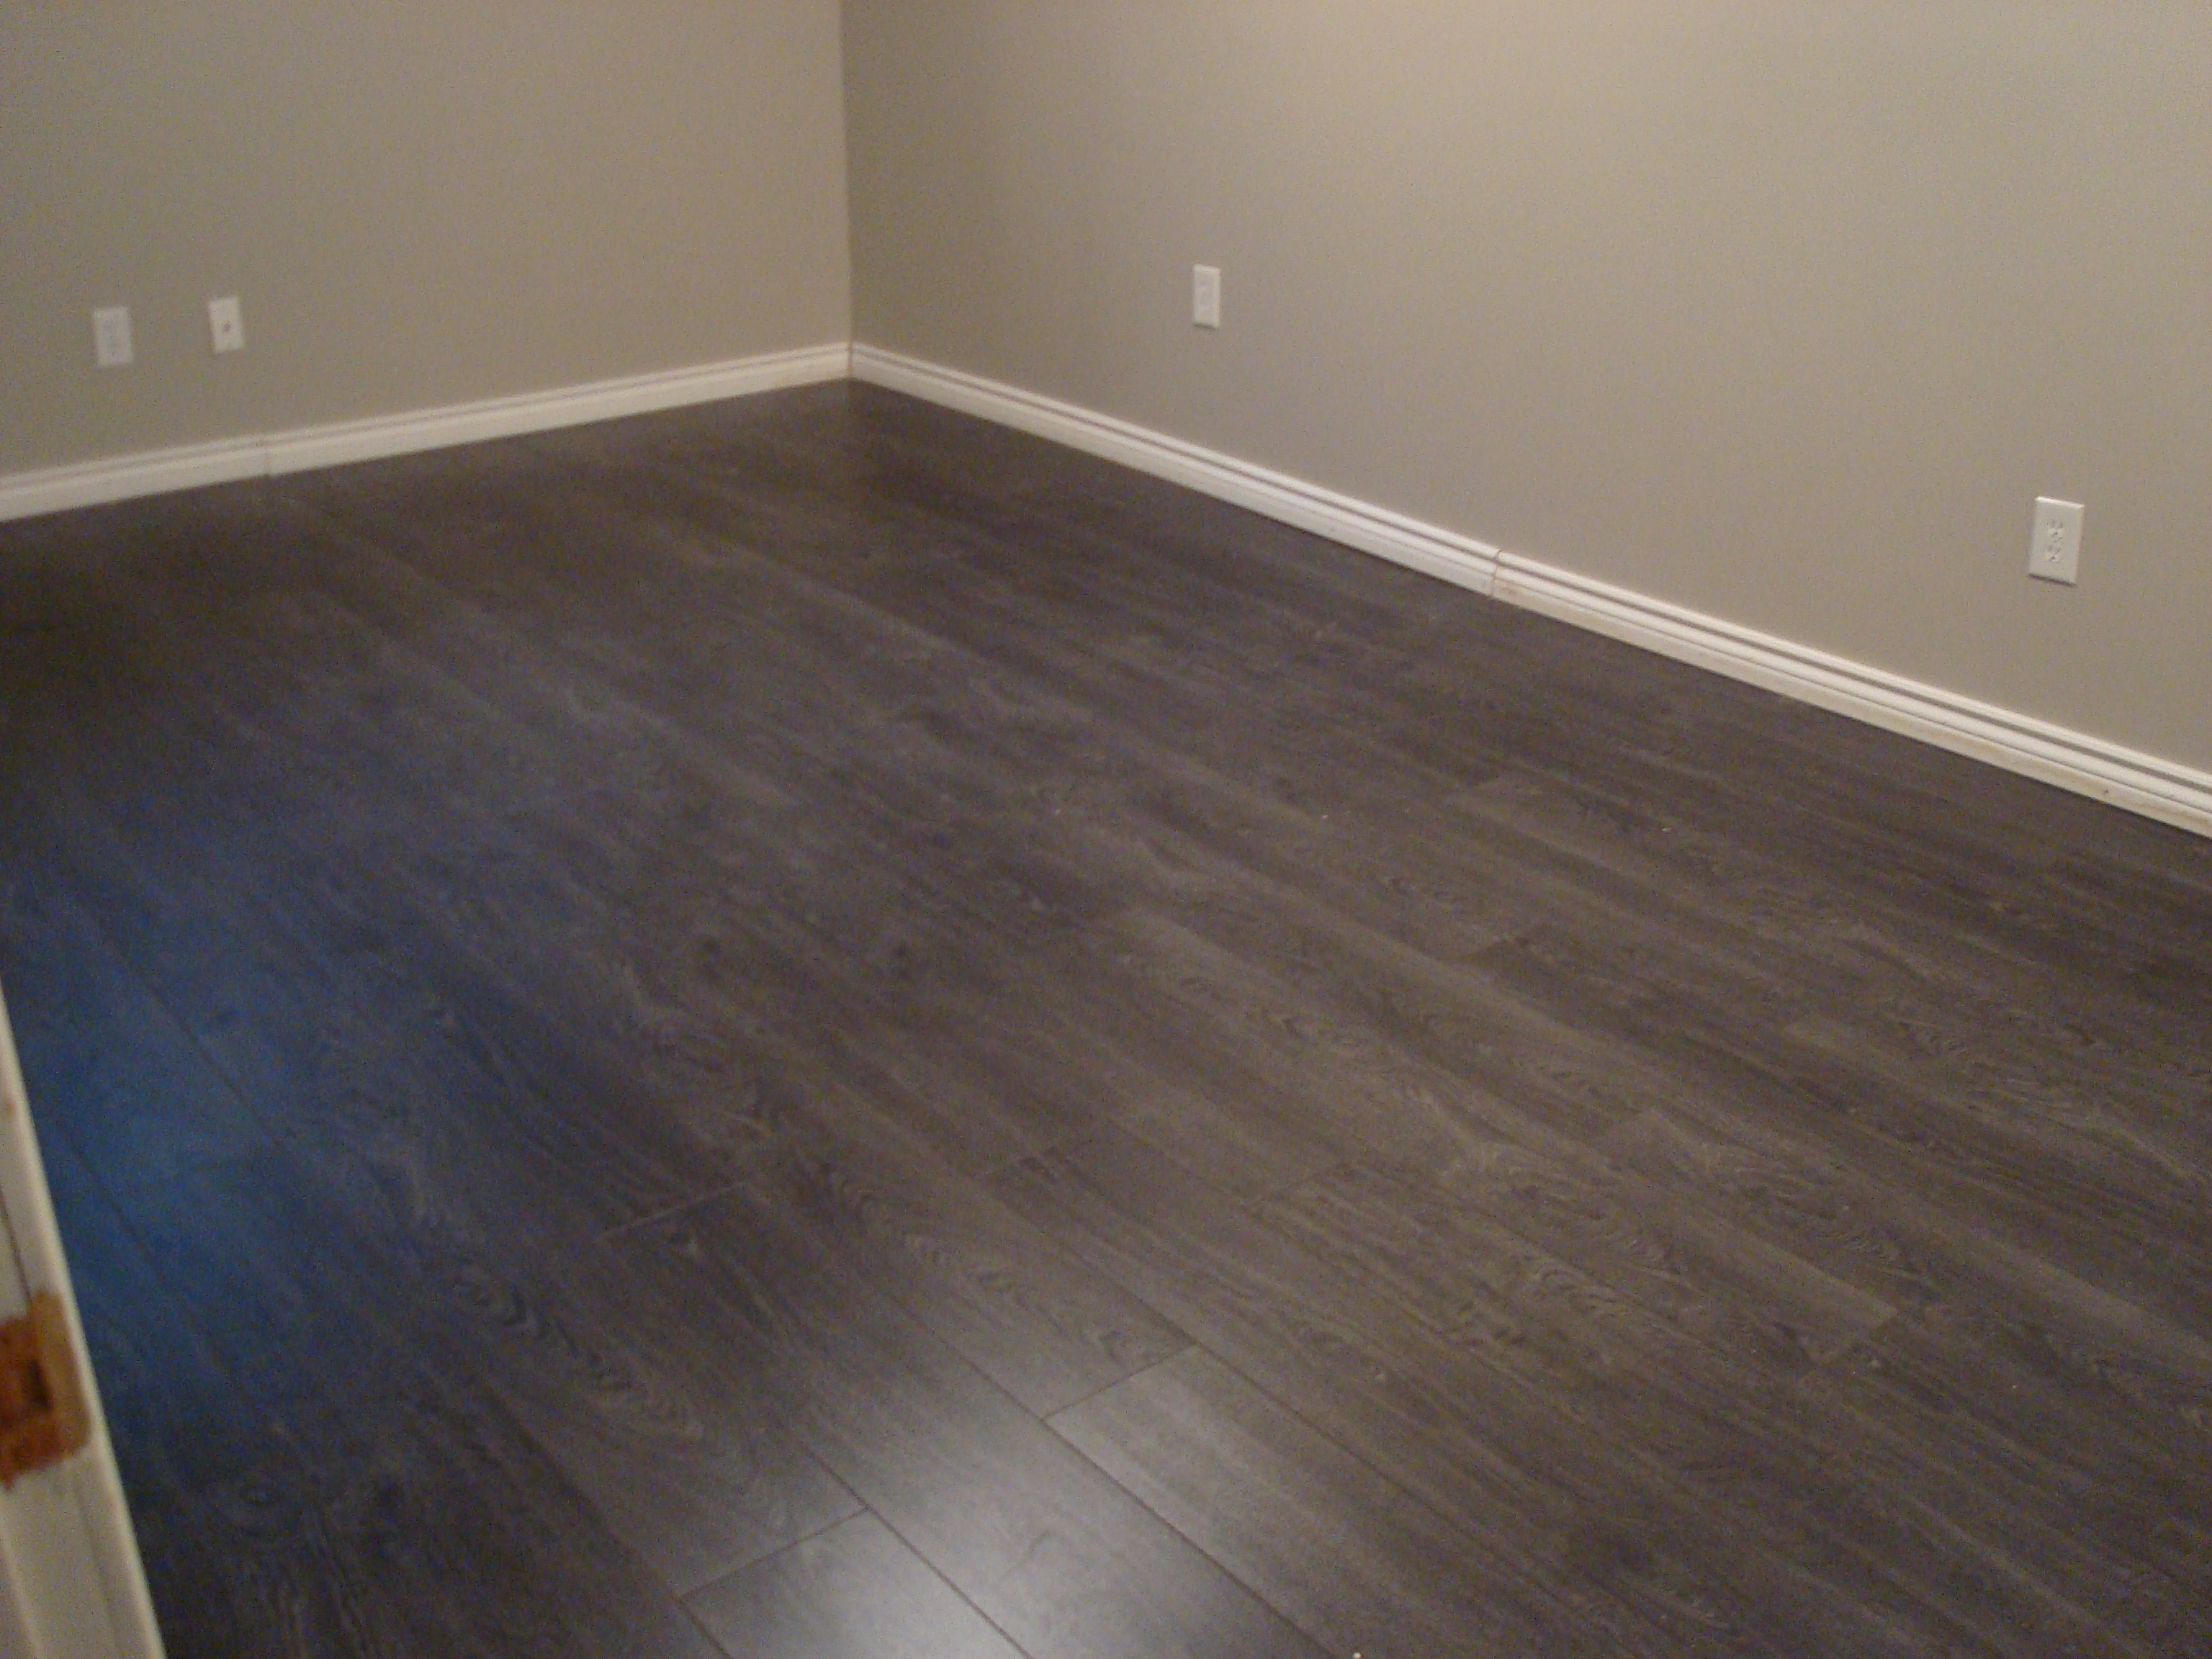 Laminate Flooring In The Basement Joey Janice Buy A House